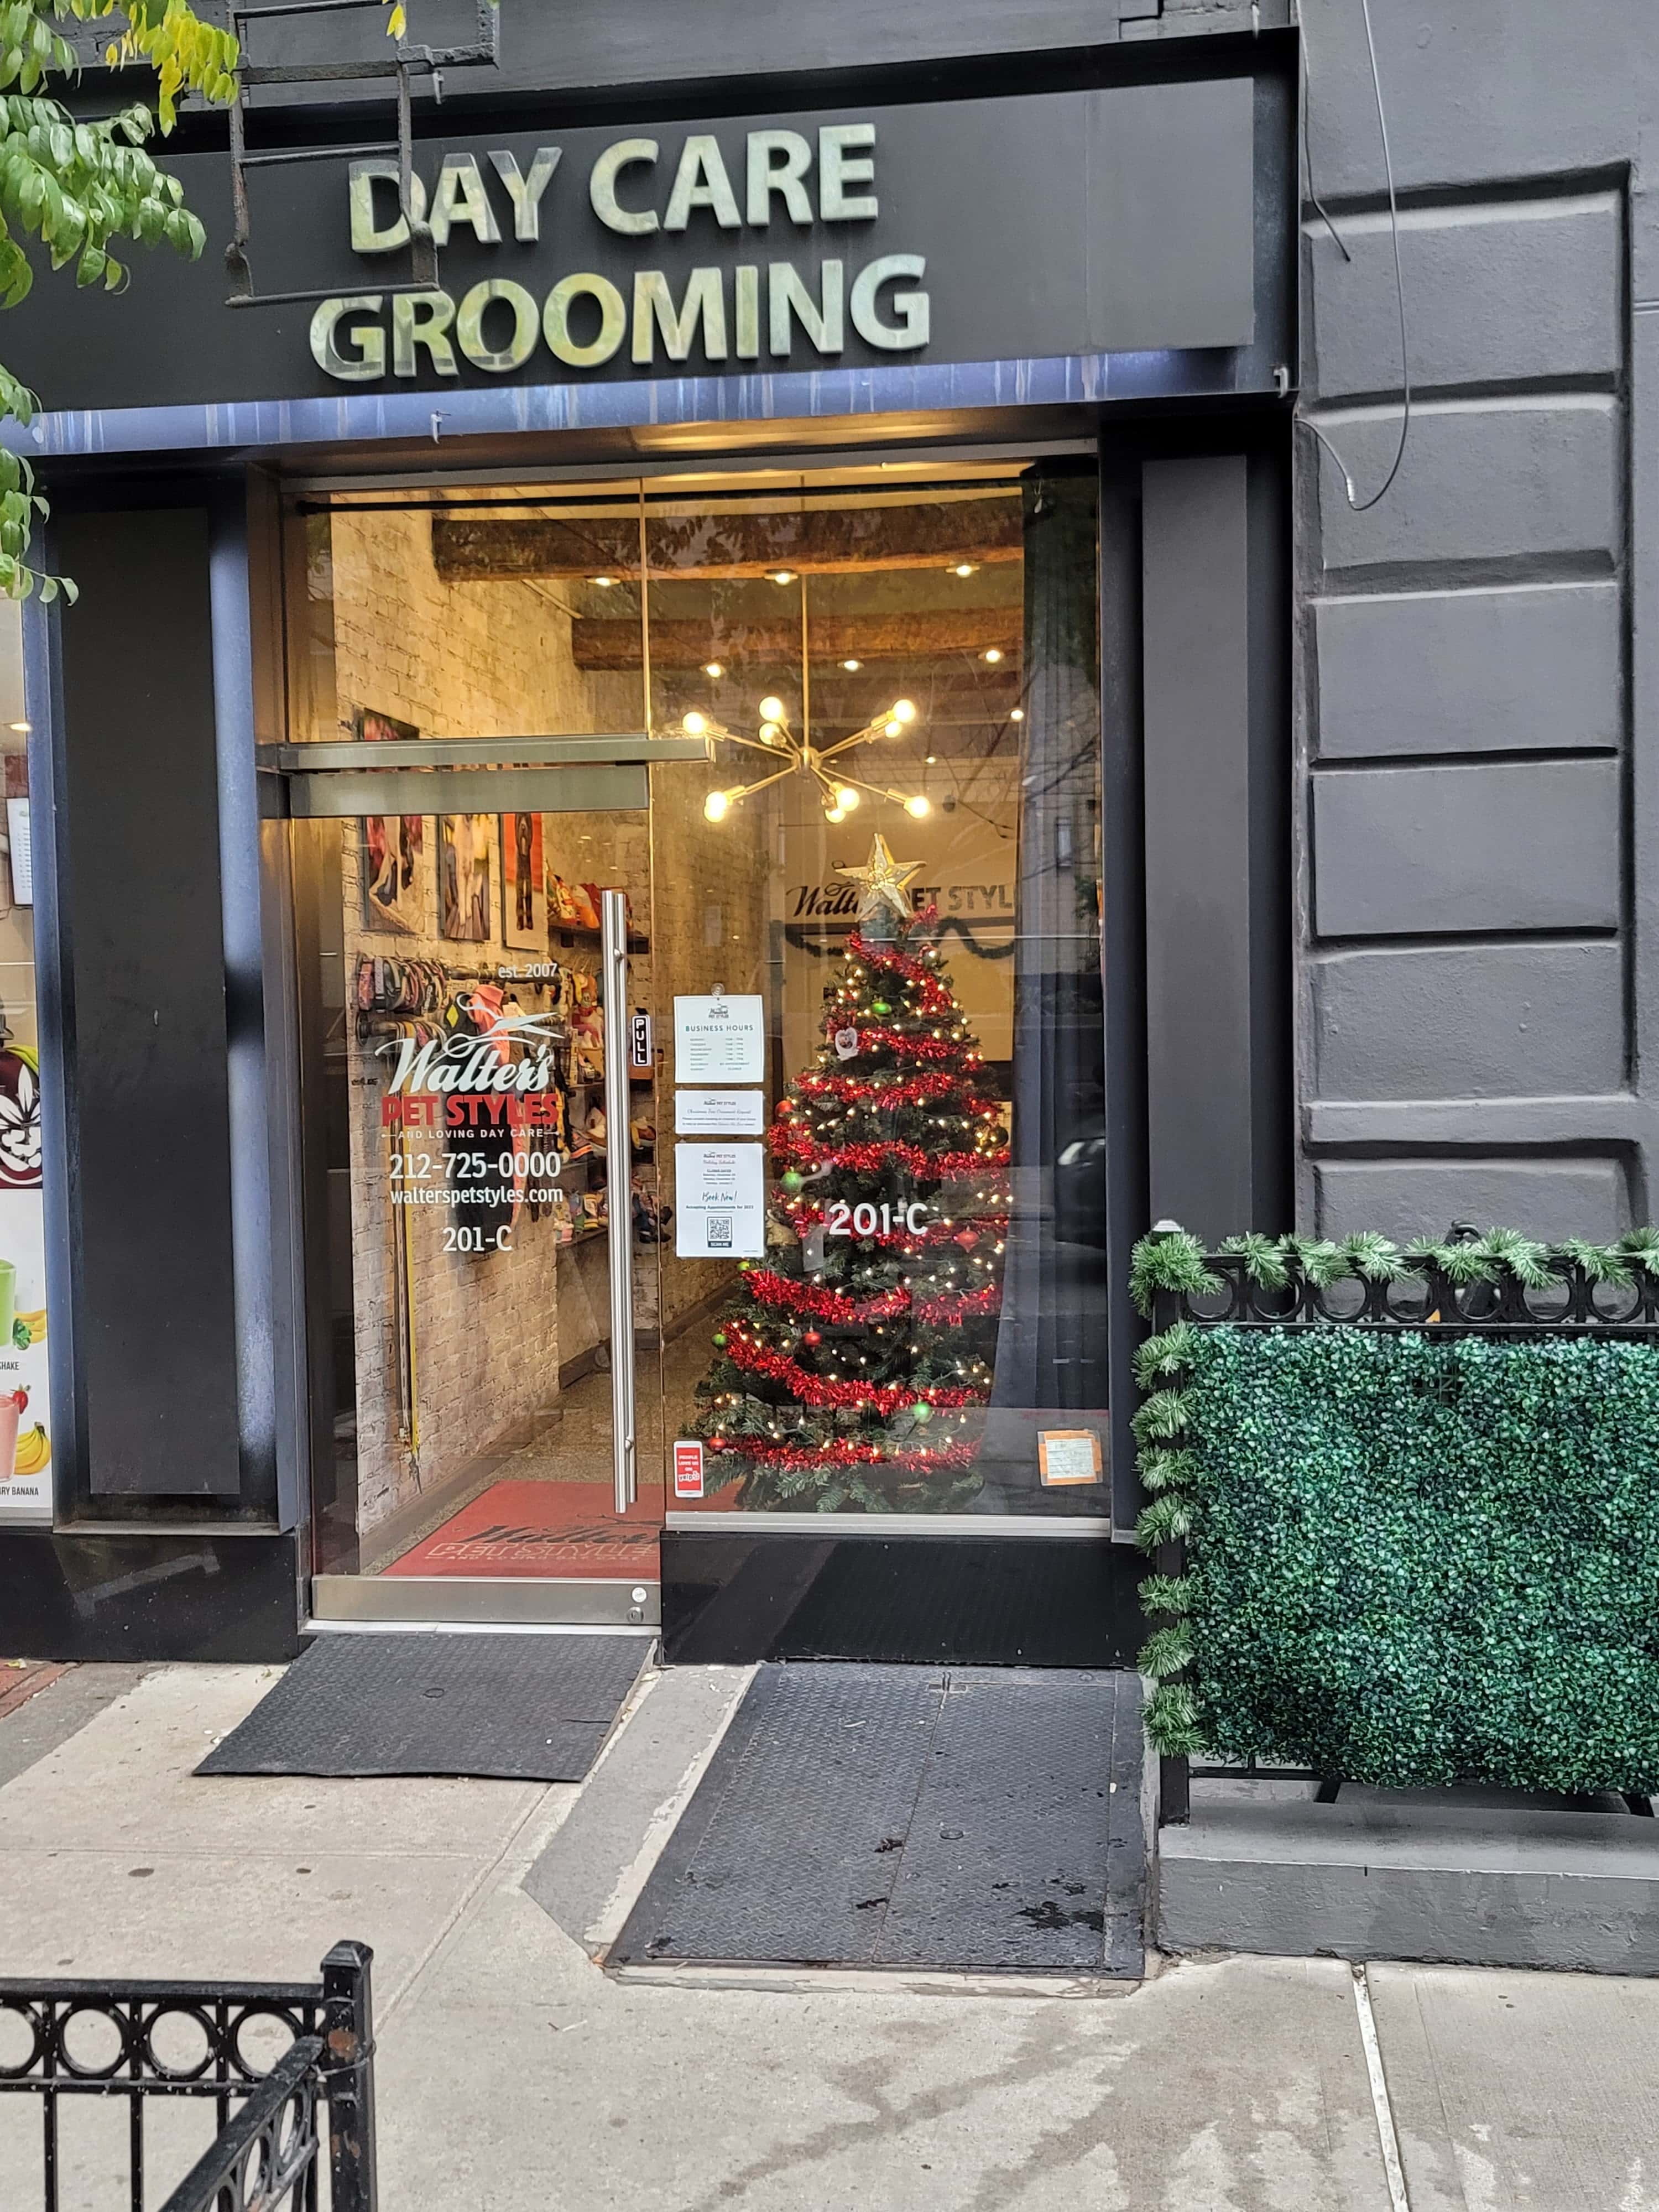 Walter's Pet Styles - New York, NY, US, all paws grooming